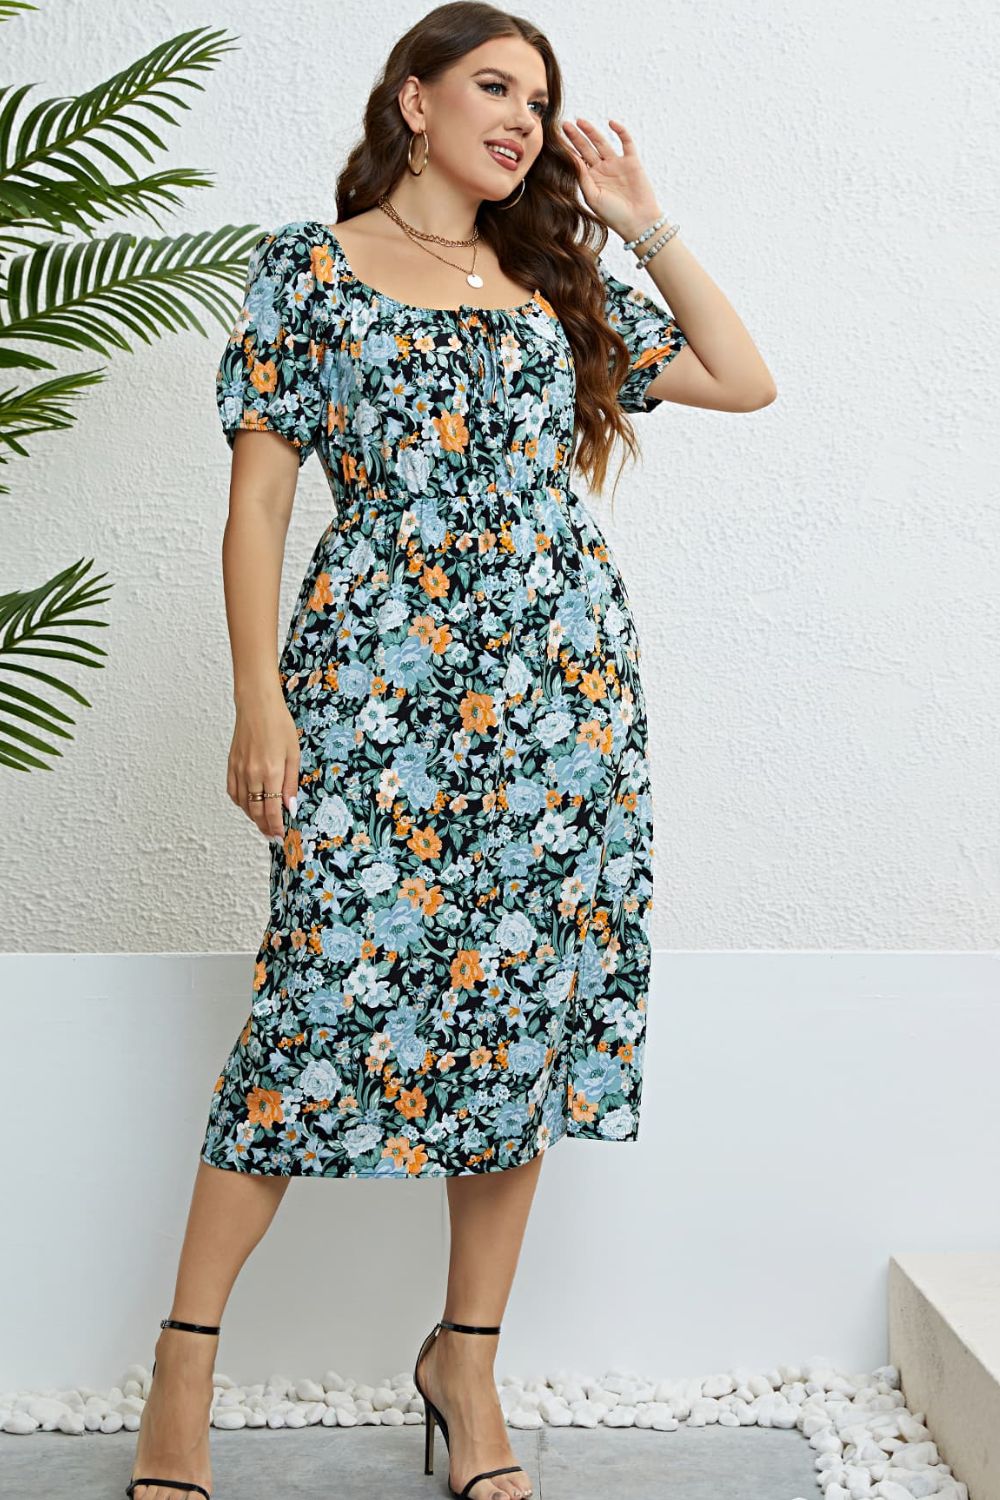 Daisy Midcentury Midi Dress in Vintage Floral | Plus Size